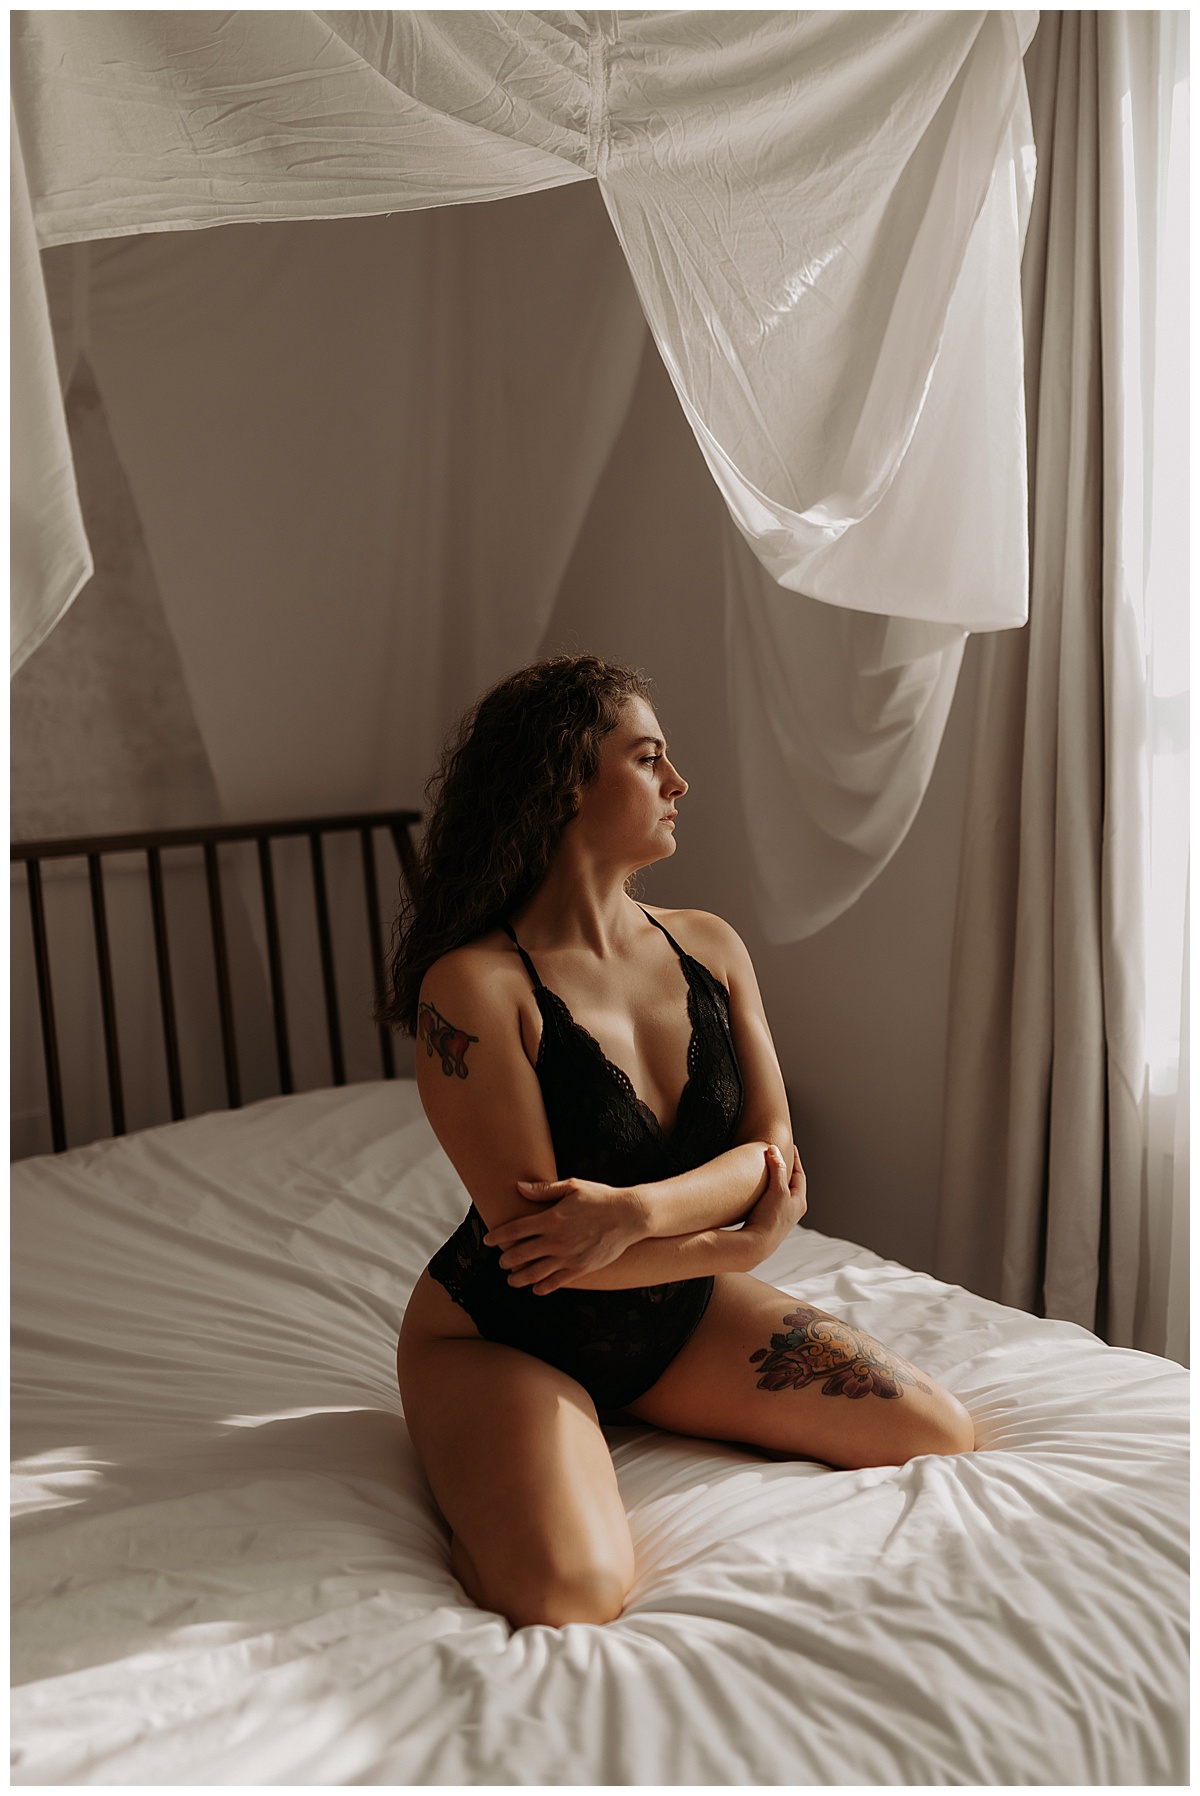 Lady kneels on the bed wearing black lingerie for Mary Castillo Photography